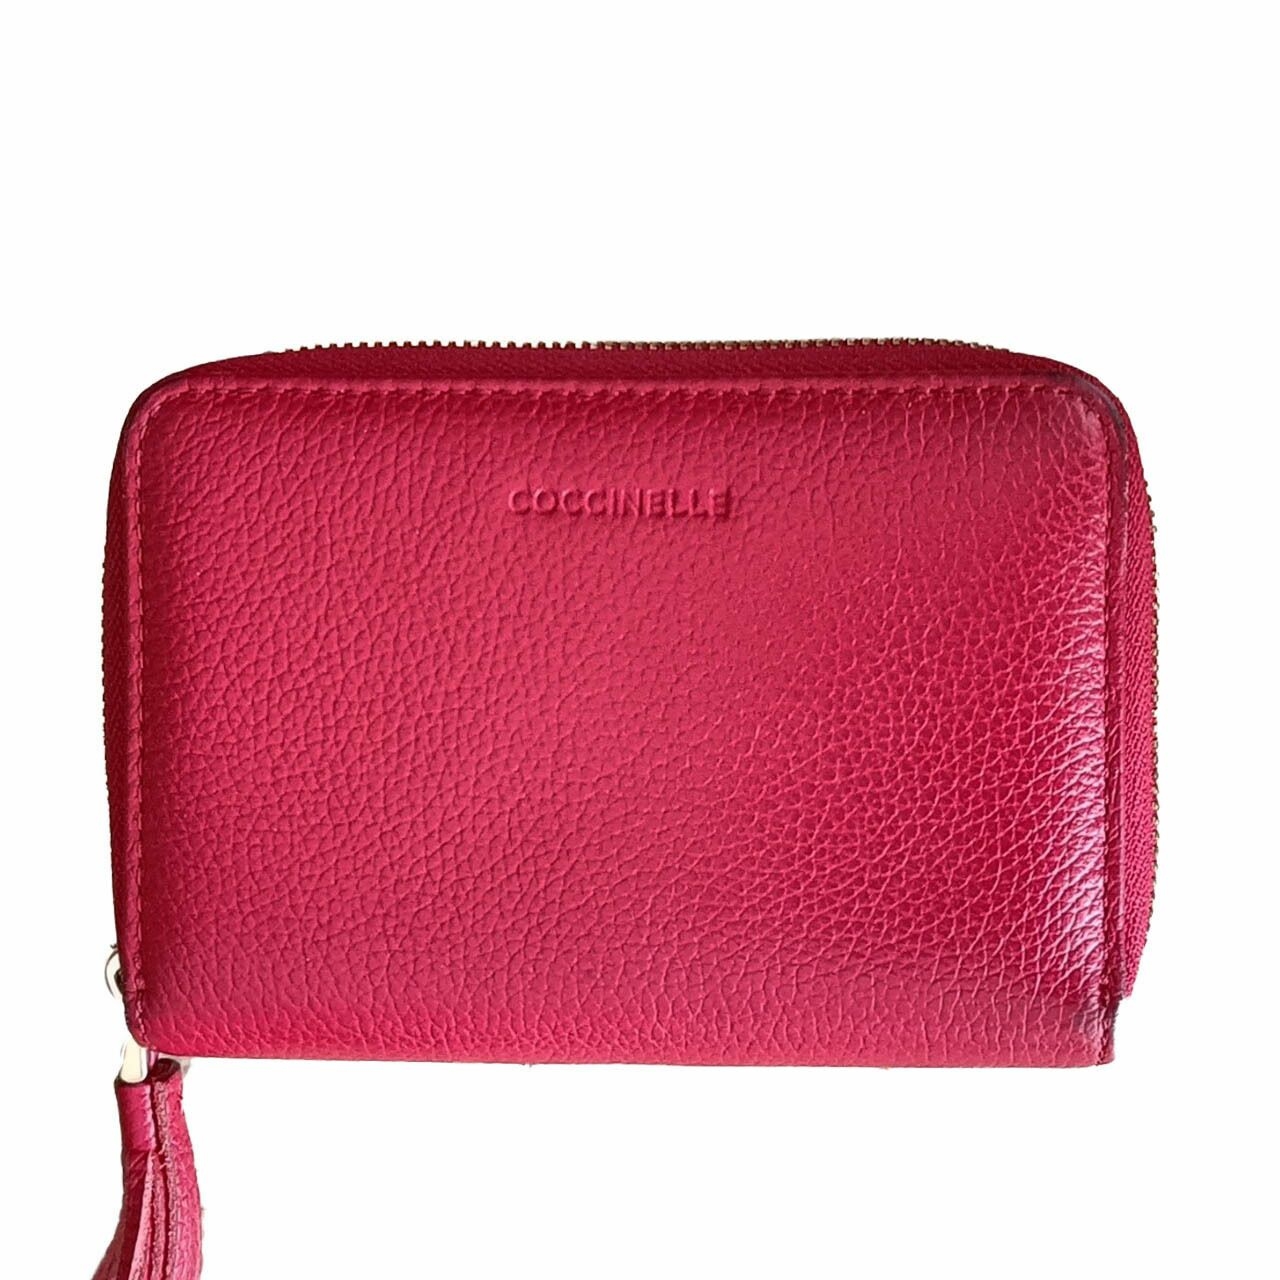 Coccinelle Red Dompet